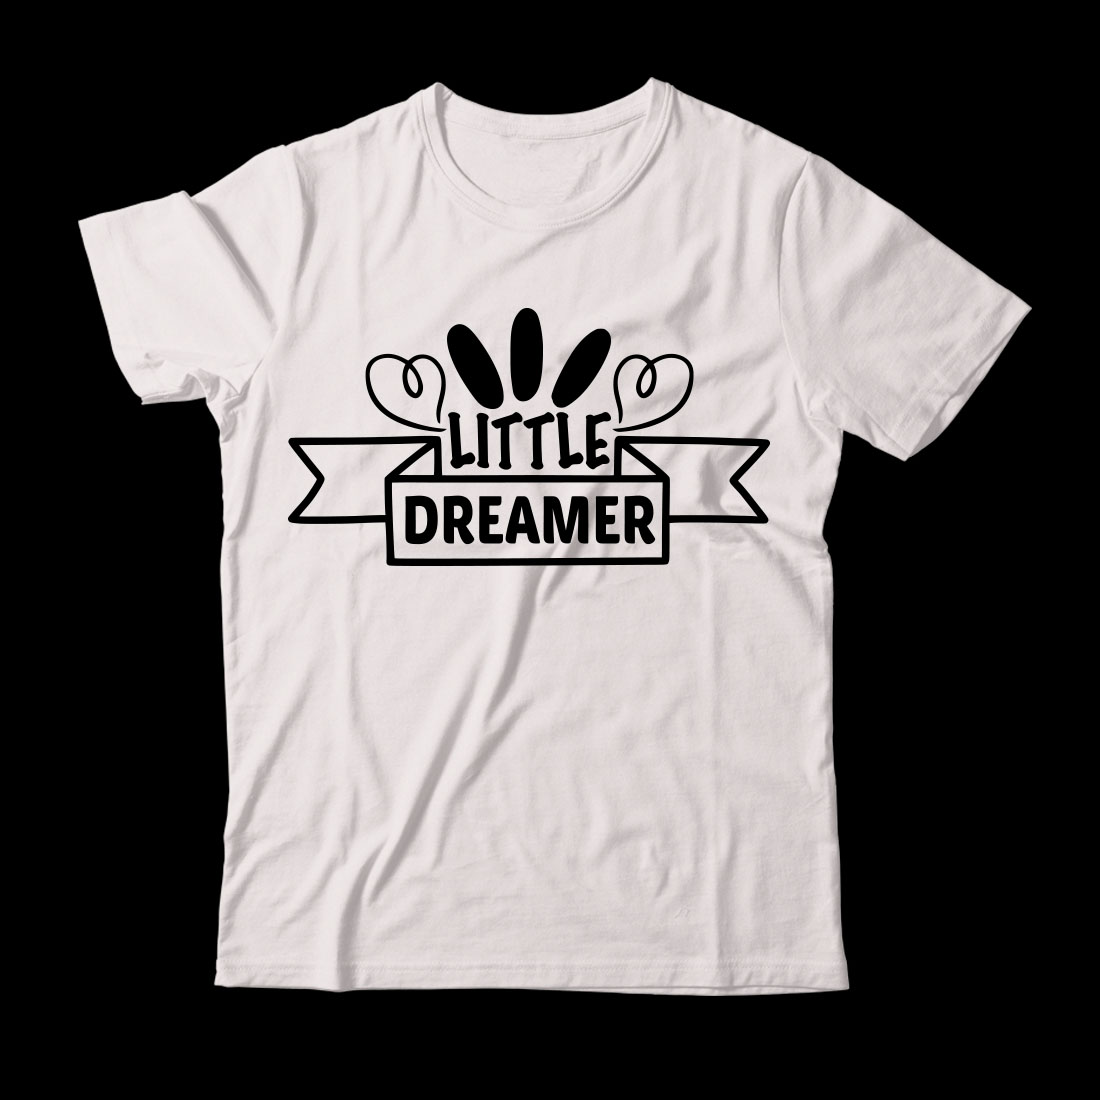 White t - shirt with the words little dreamer on it.